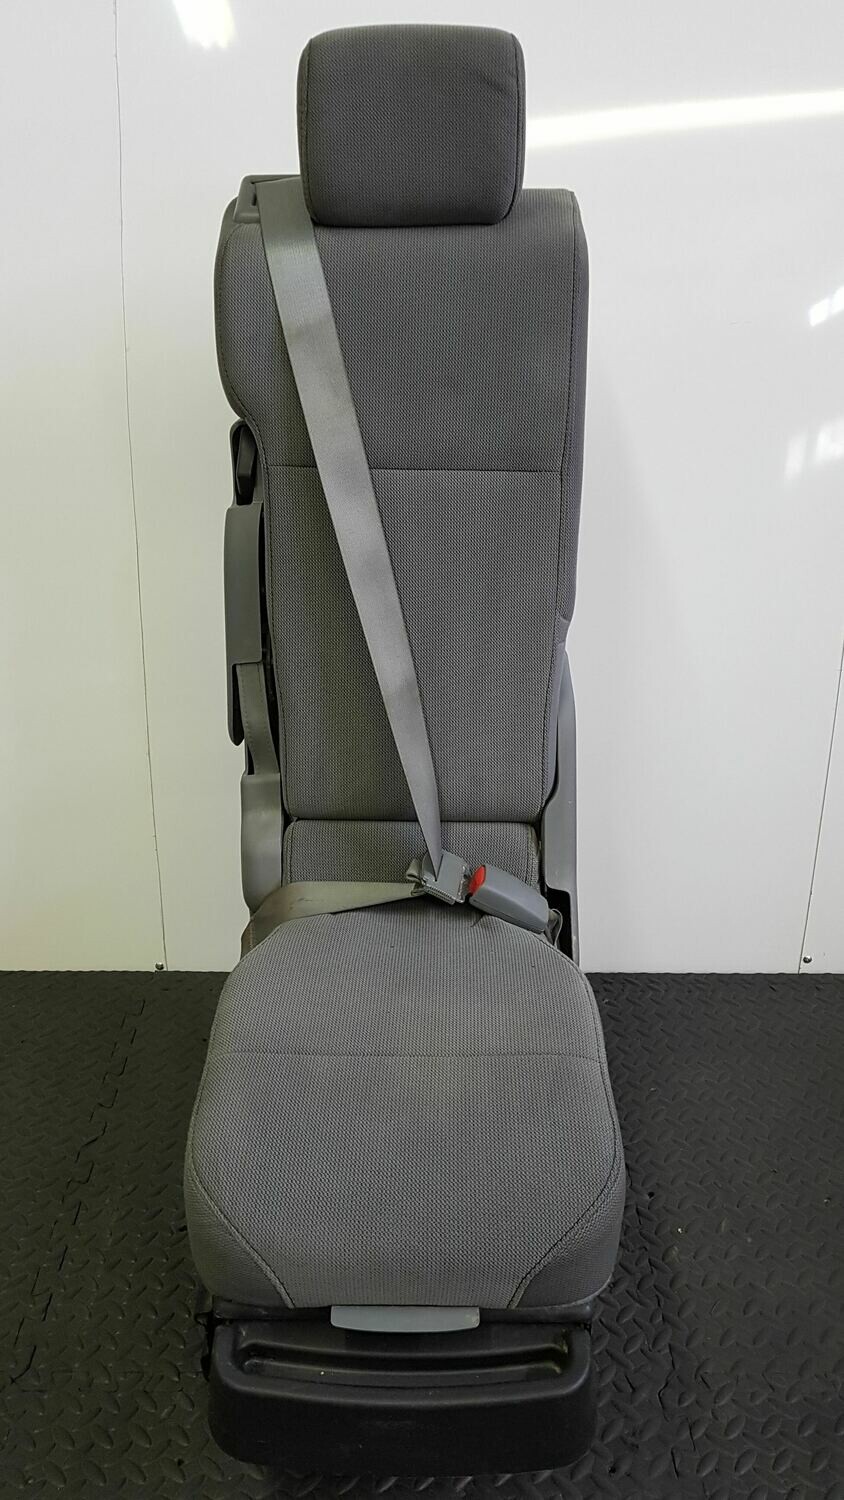 Centre Seat - Folds Down W/ Cup Holder